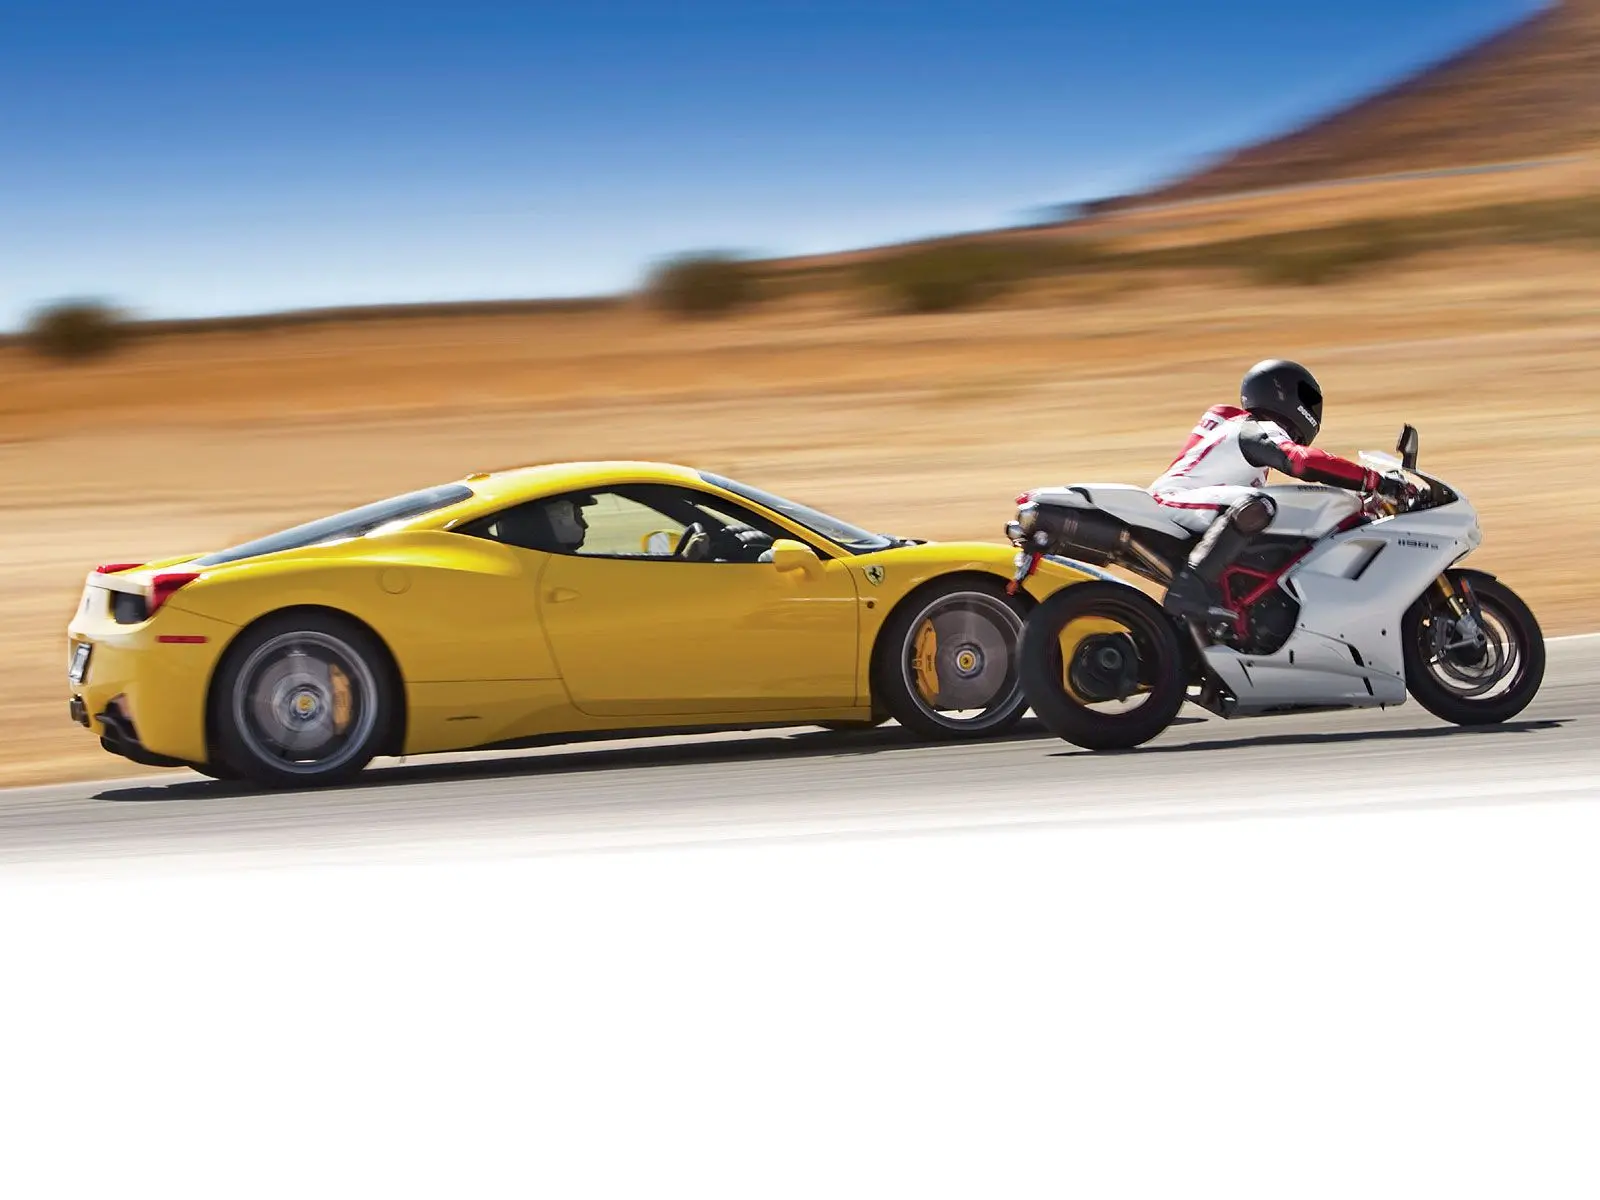 a ferrari is fast than motorbike - What is faster a motorcycle or a car